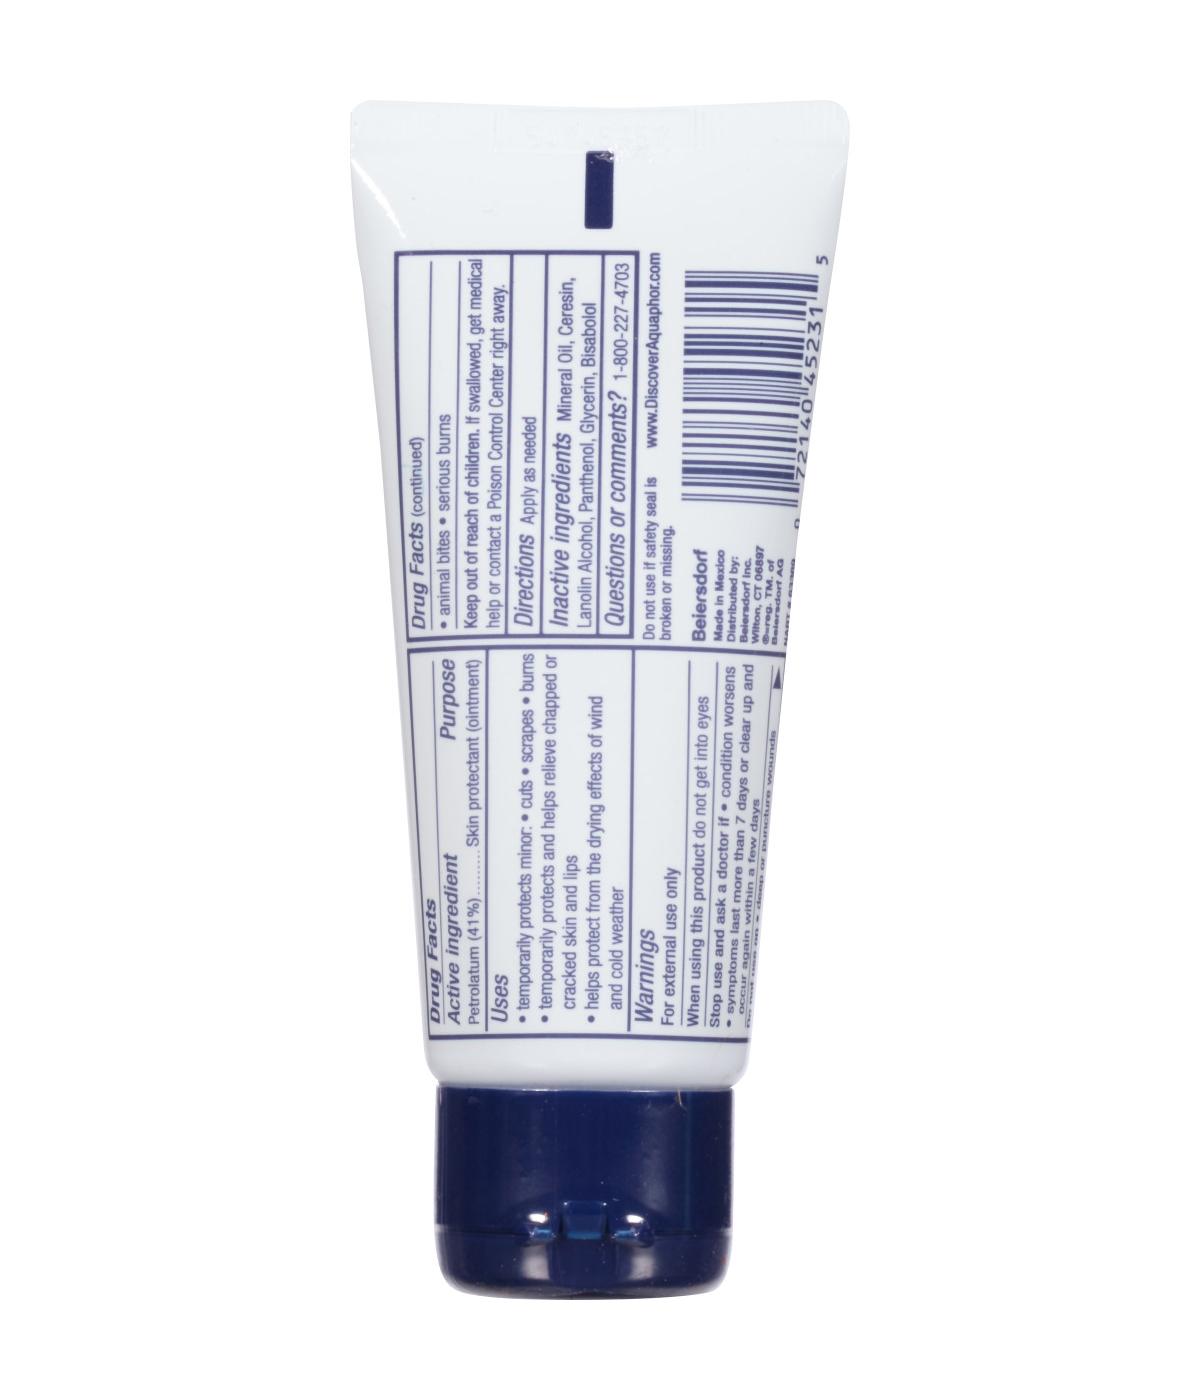 Aquaphor Advanced Therapy Healing Ointment Skin Protectant Tube; image 2 of 3